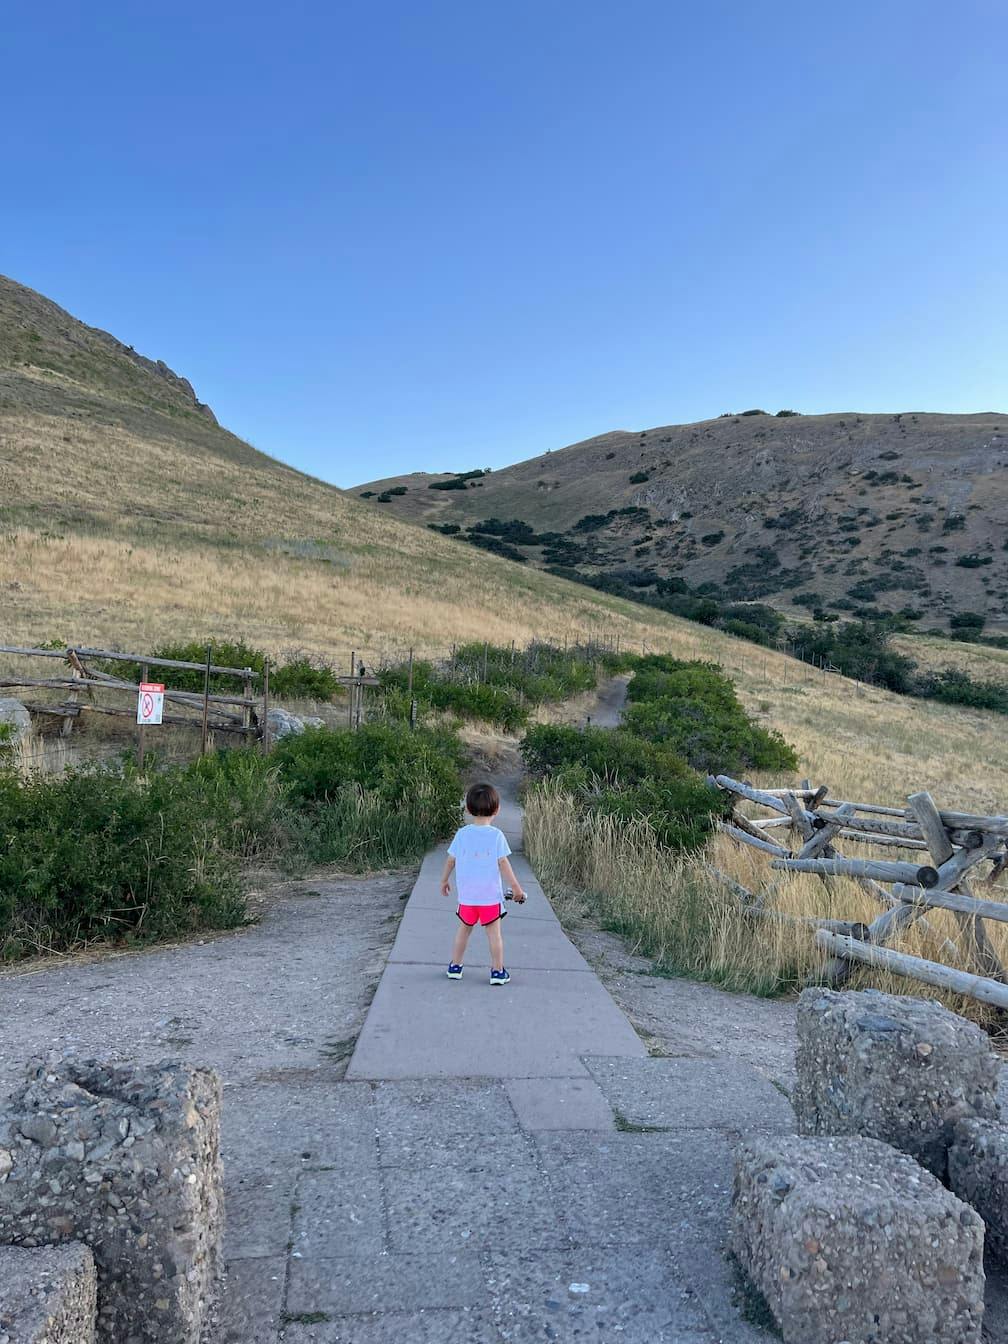 Baby O on a trail on the outskirts of Salt Lake City